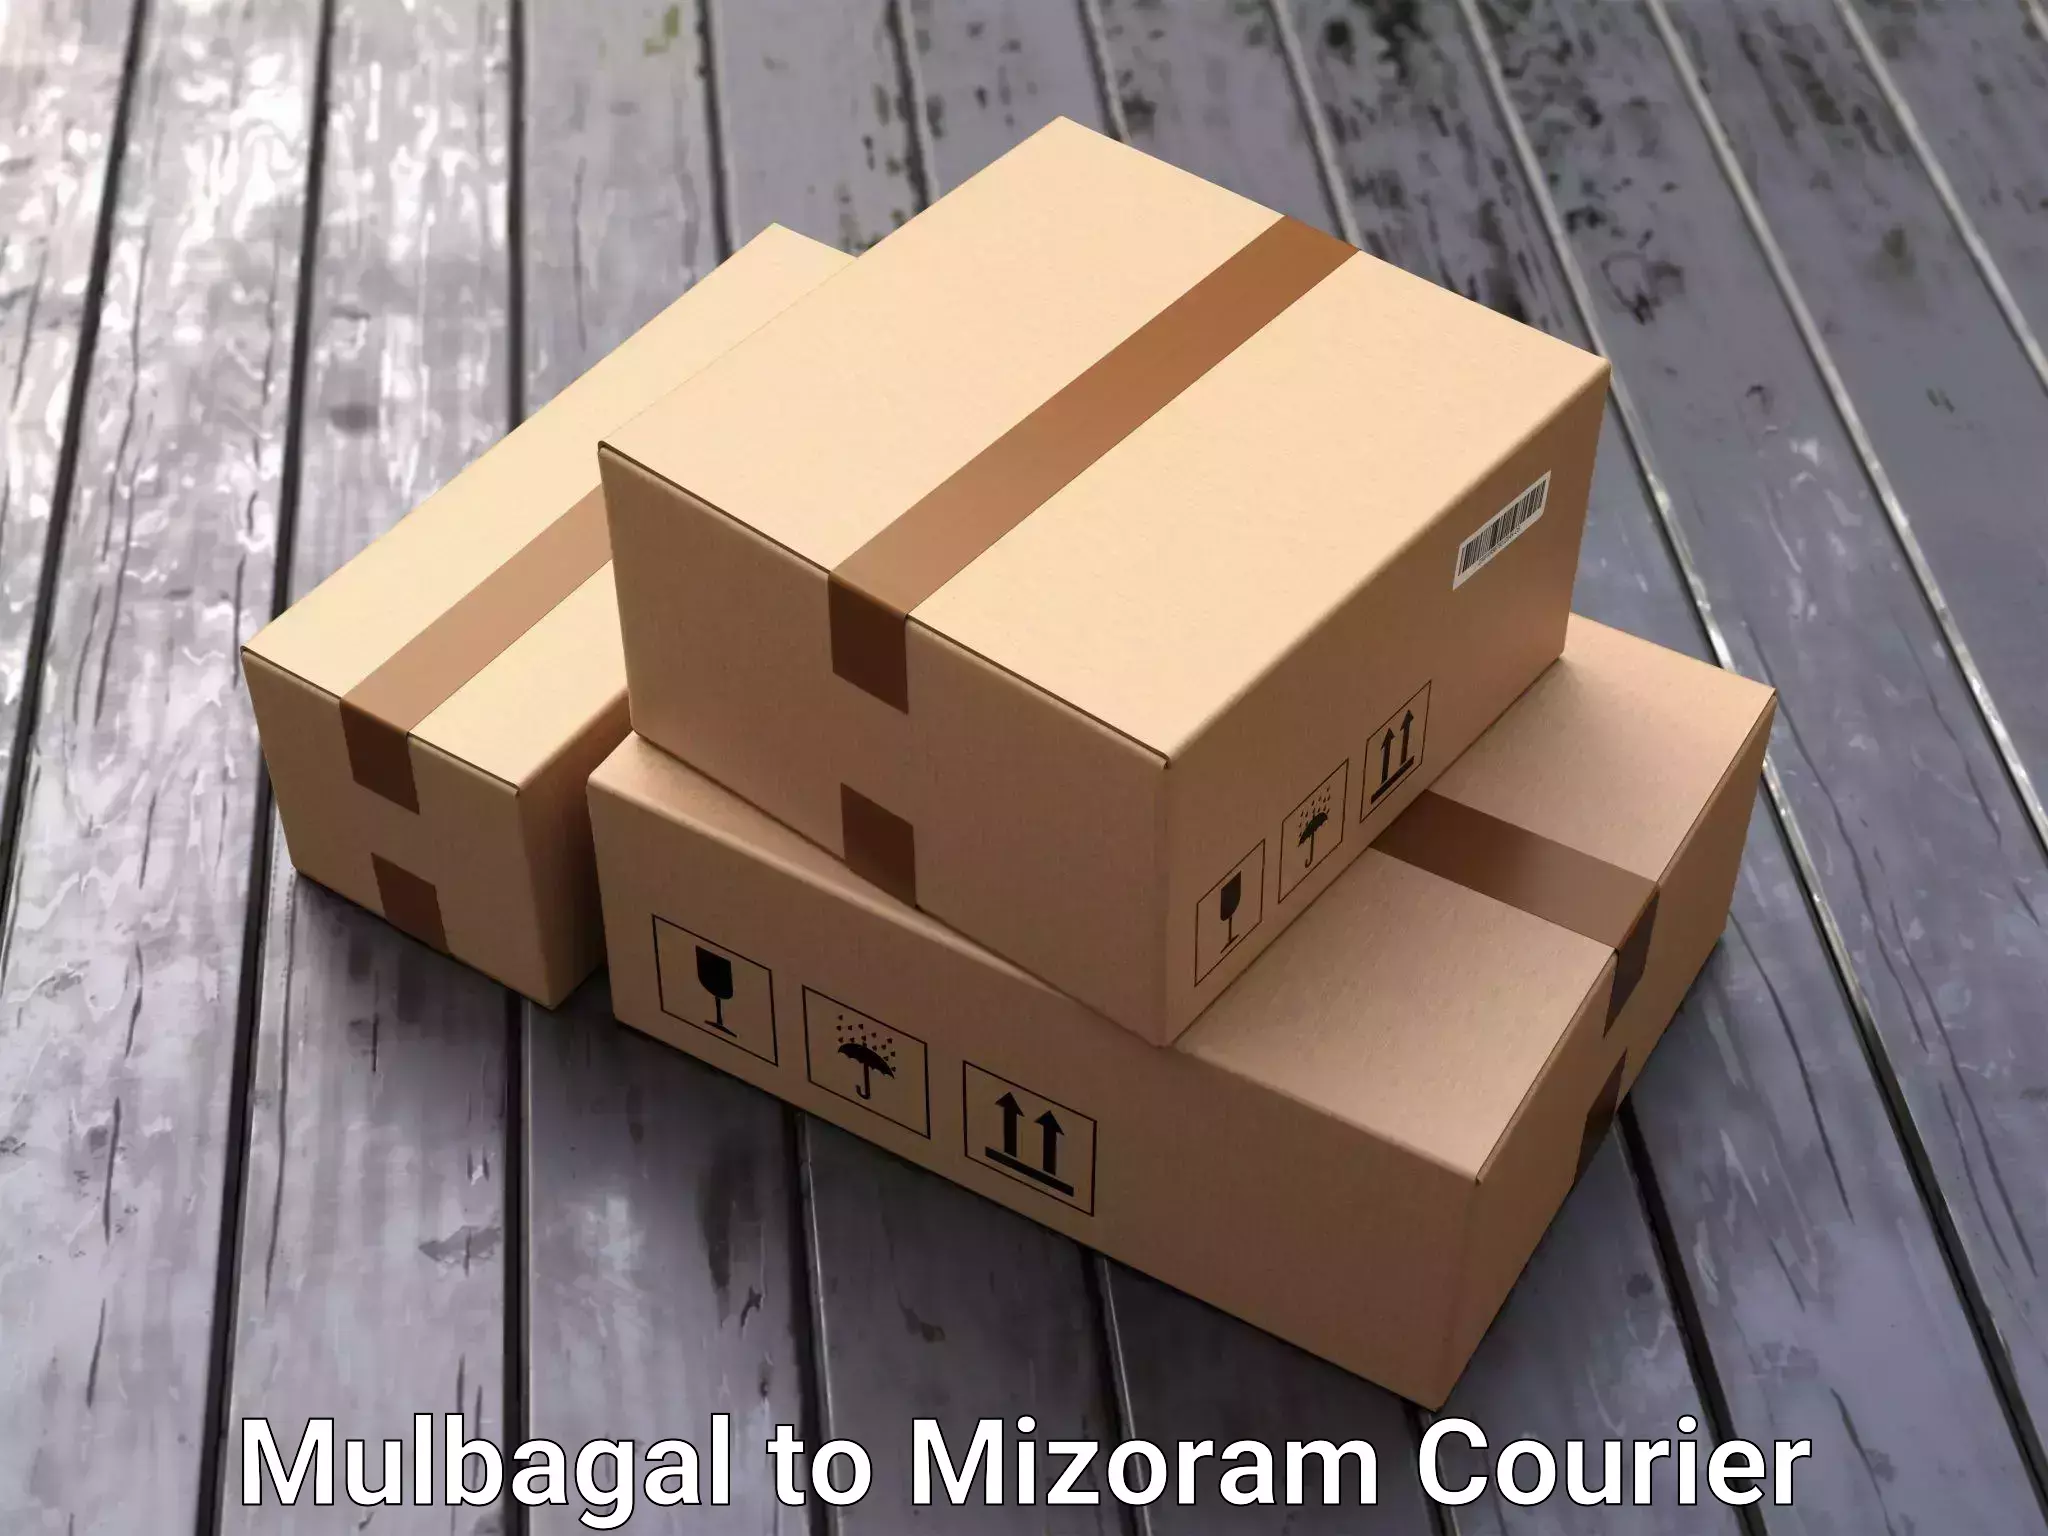 Trusted moving company Mulbagal to Mizoram